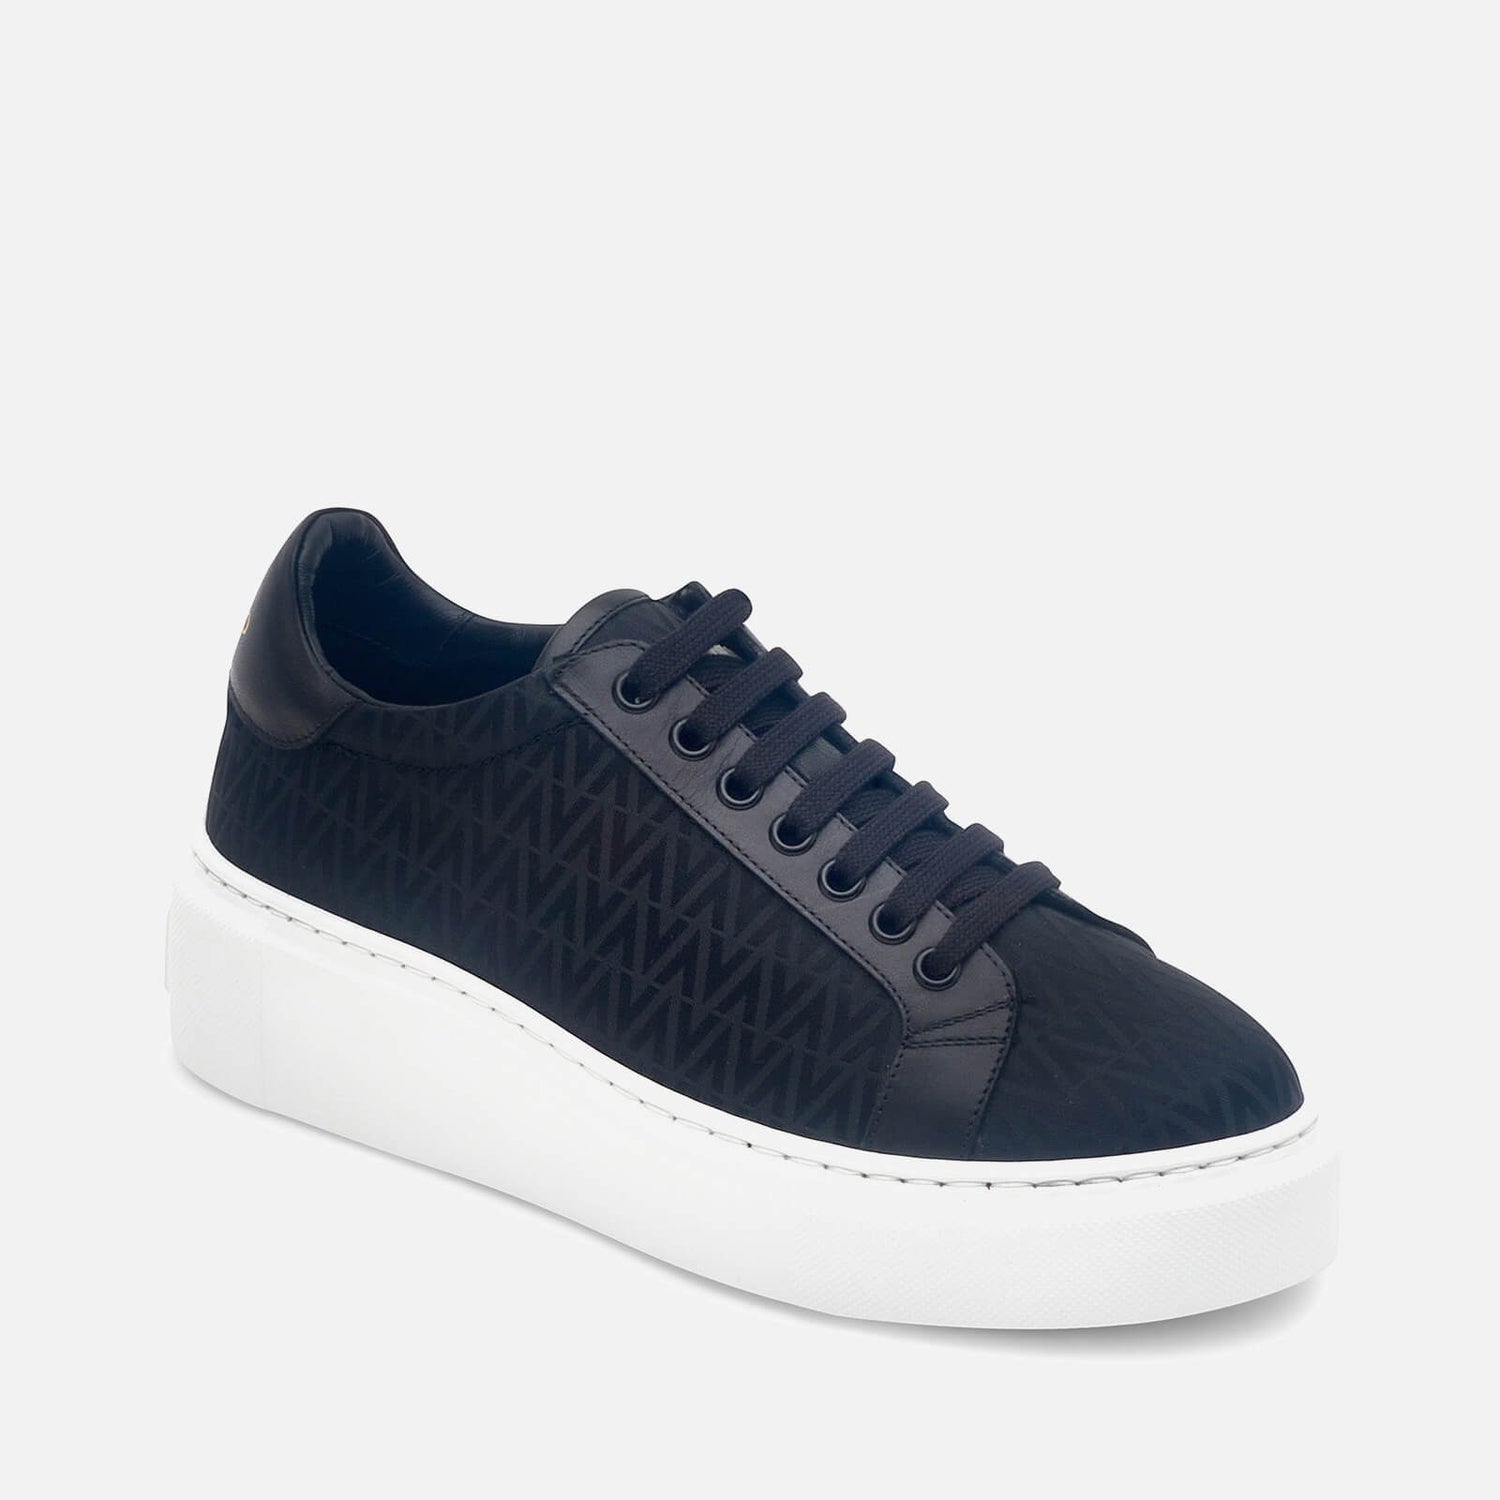 Valentino Women's Low-Top Trainers - Black